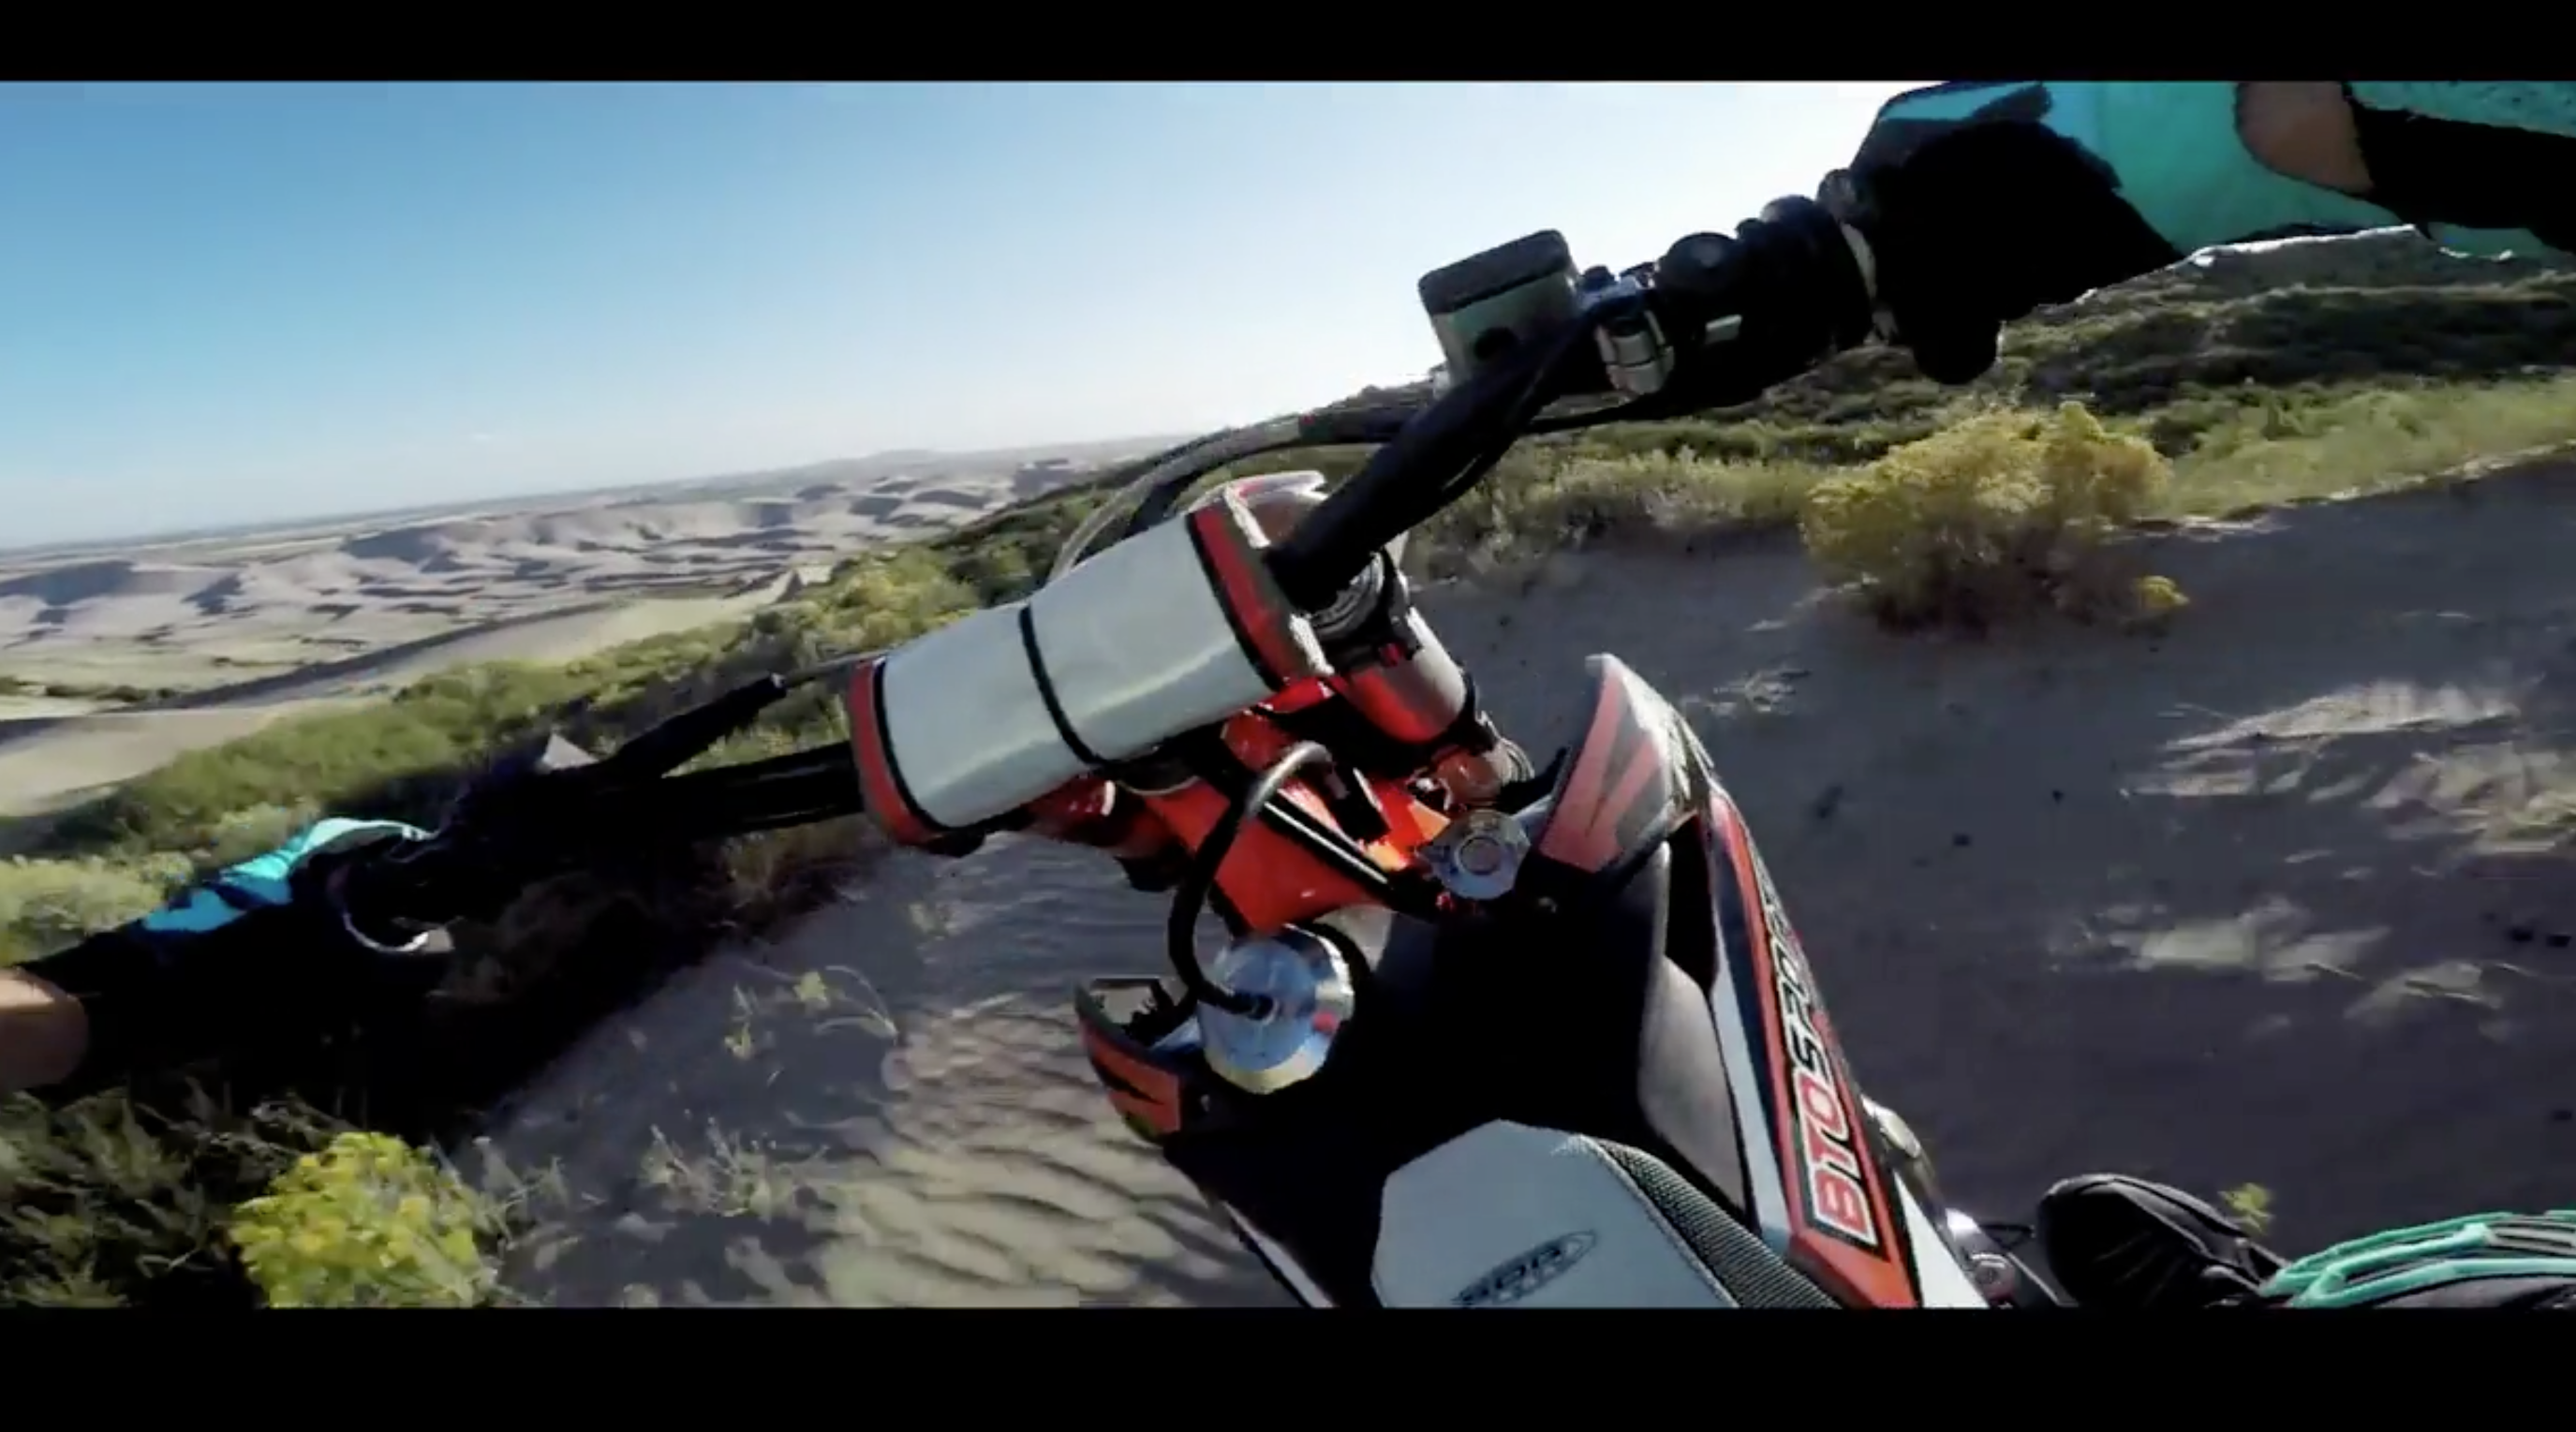 Bike along the dunes with this GoPro video (still)